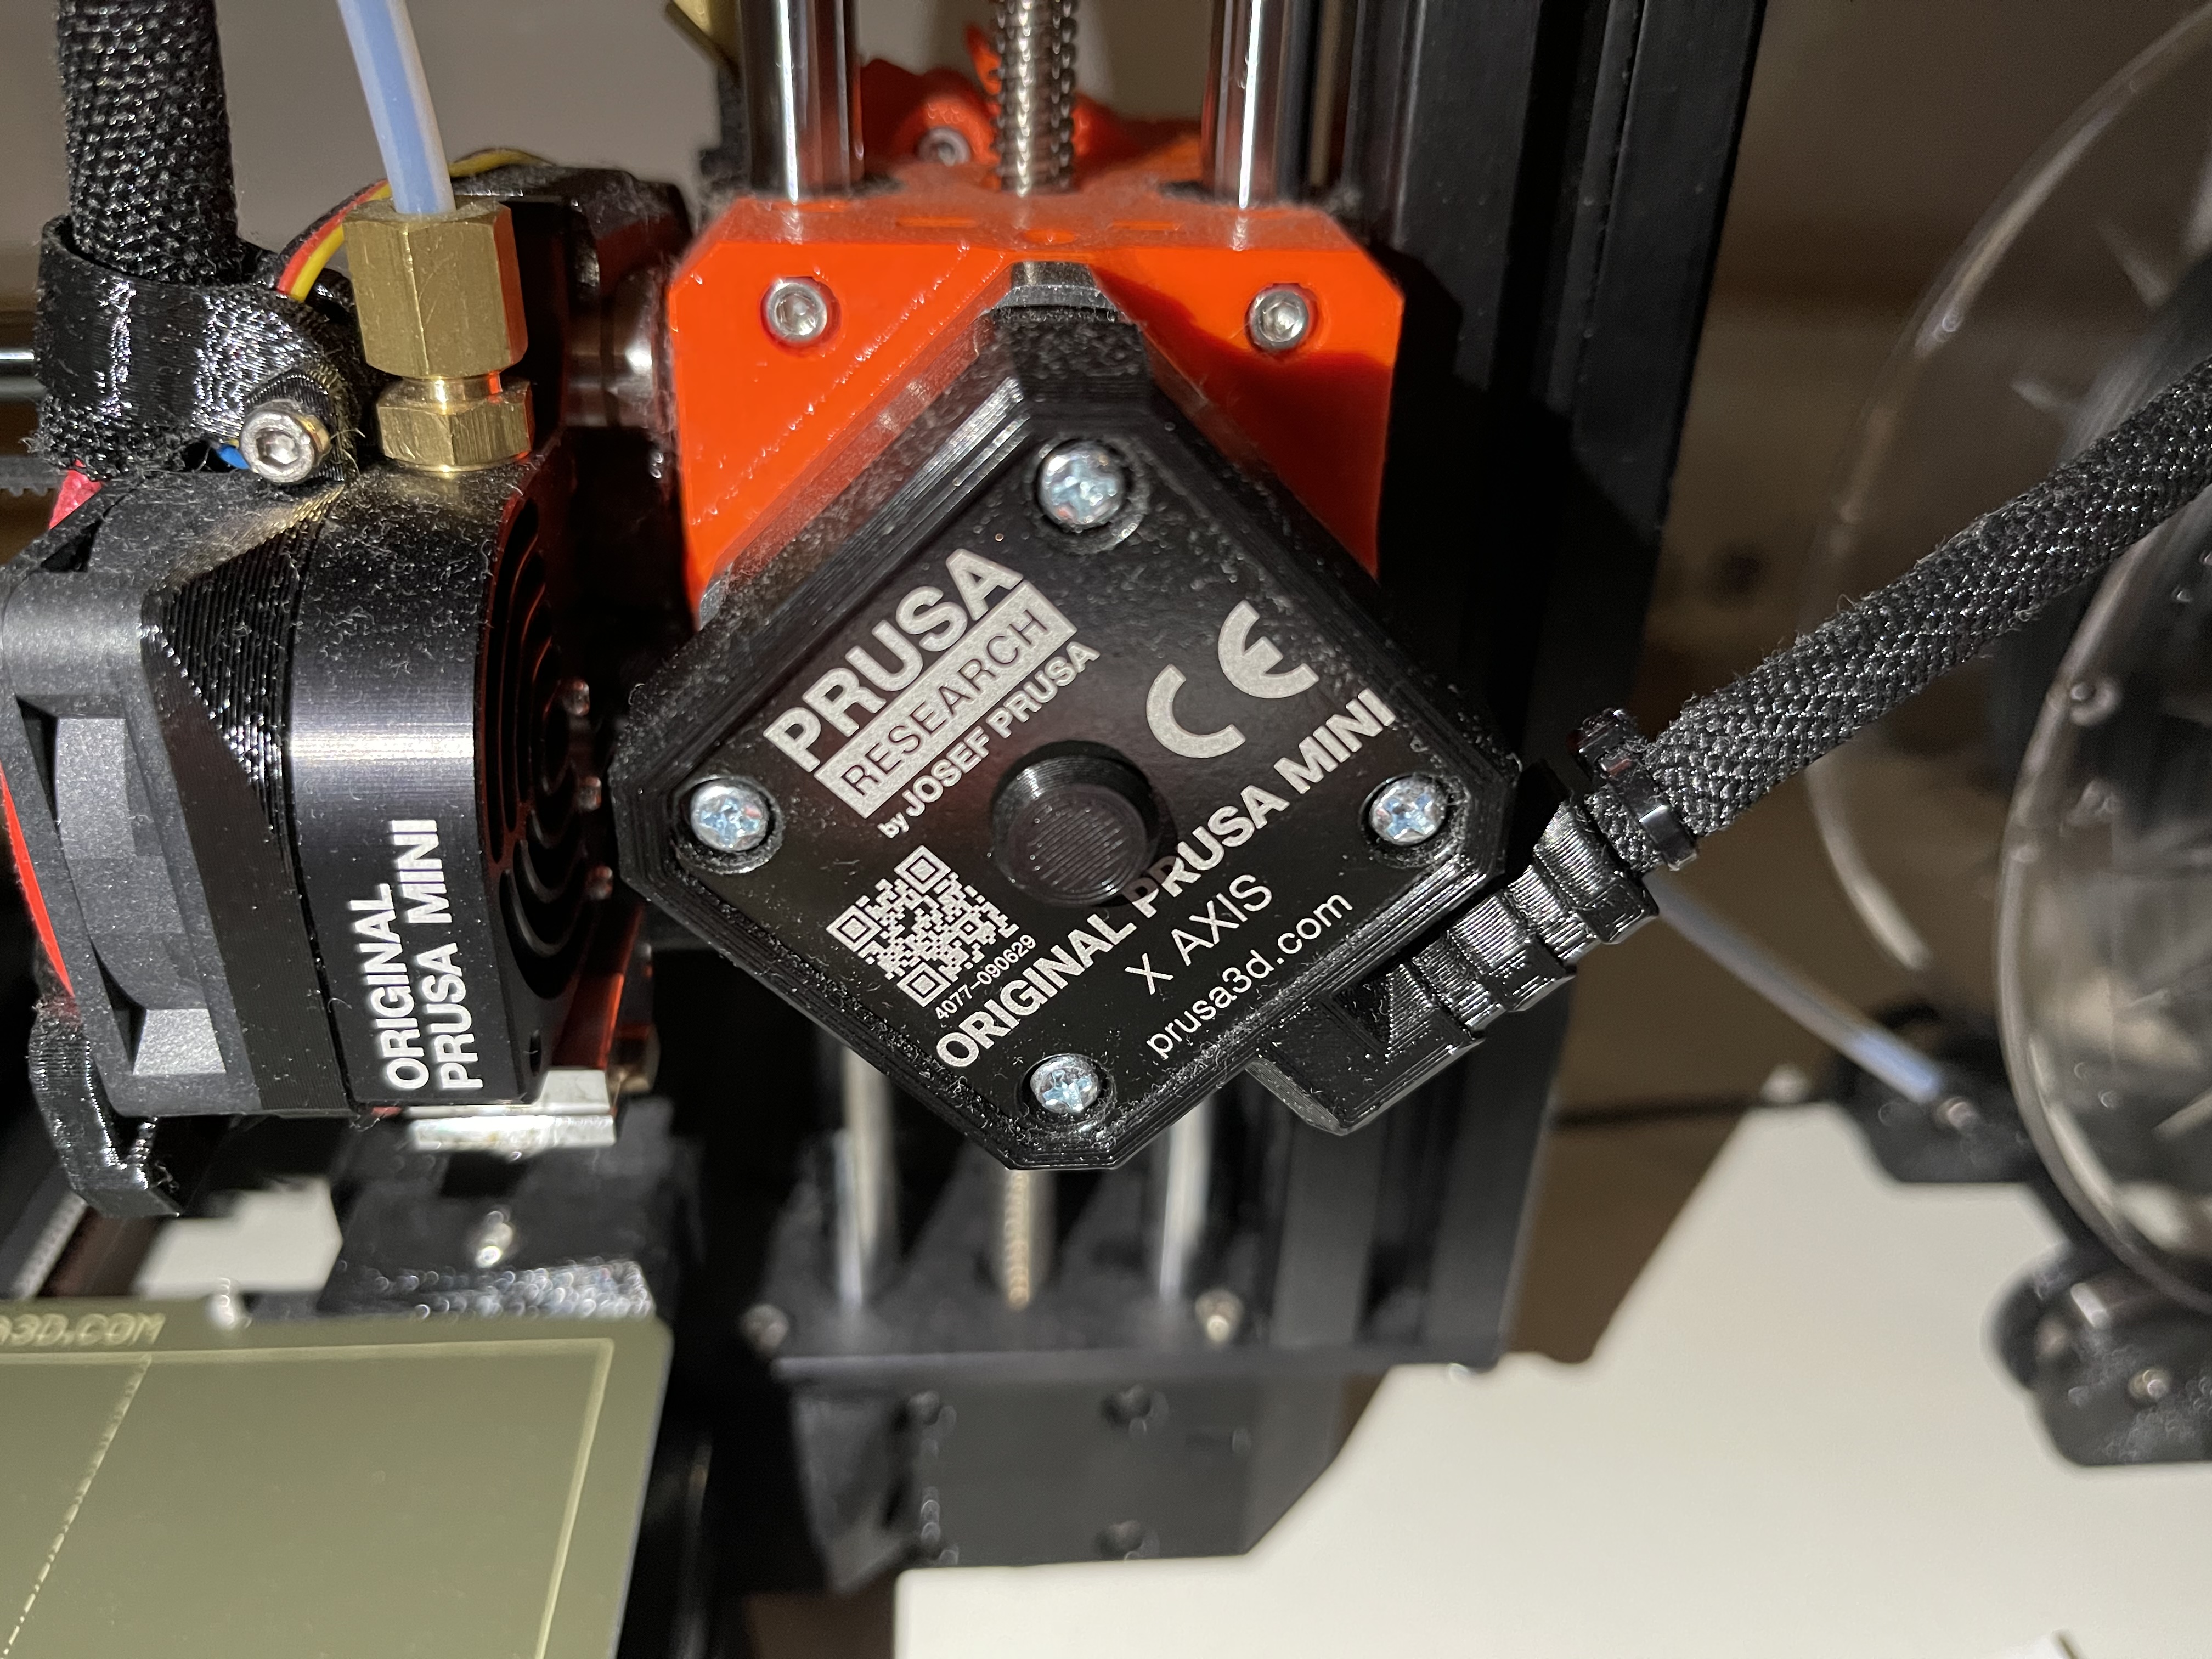 Prusa Mini Mini+ dust cover for stepper motors - axis X and extruder E